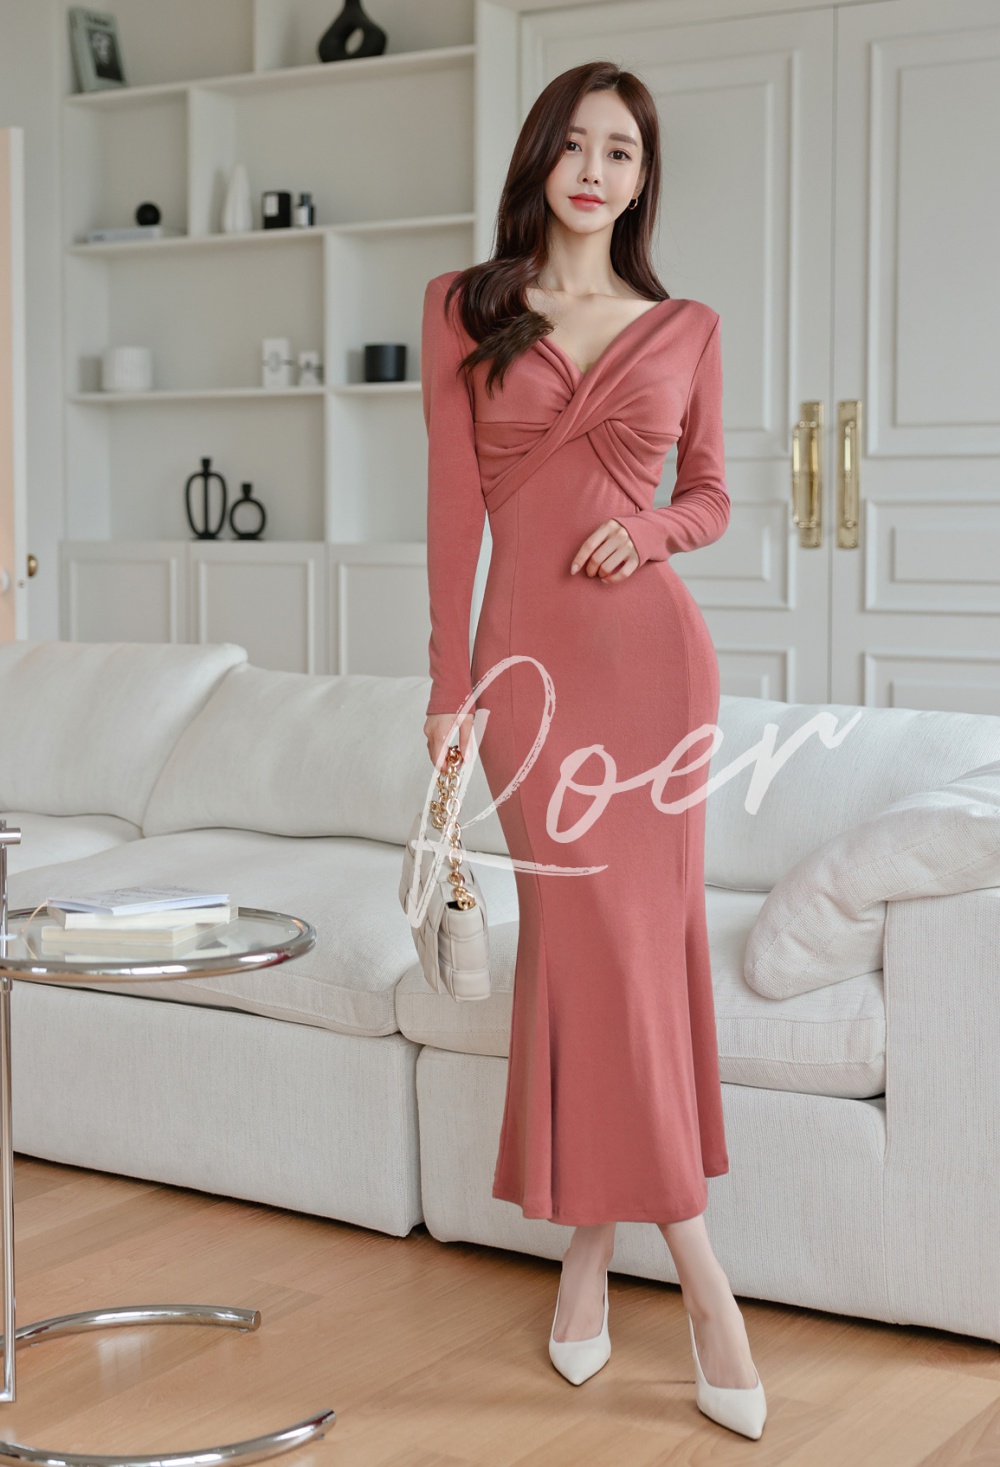 Sexy autumn and winter dress for women